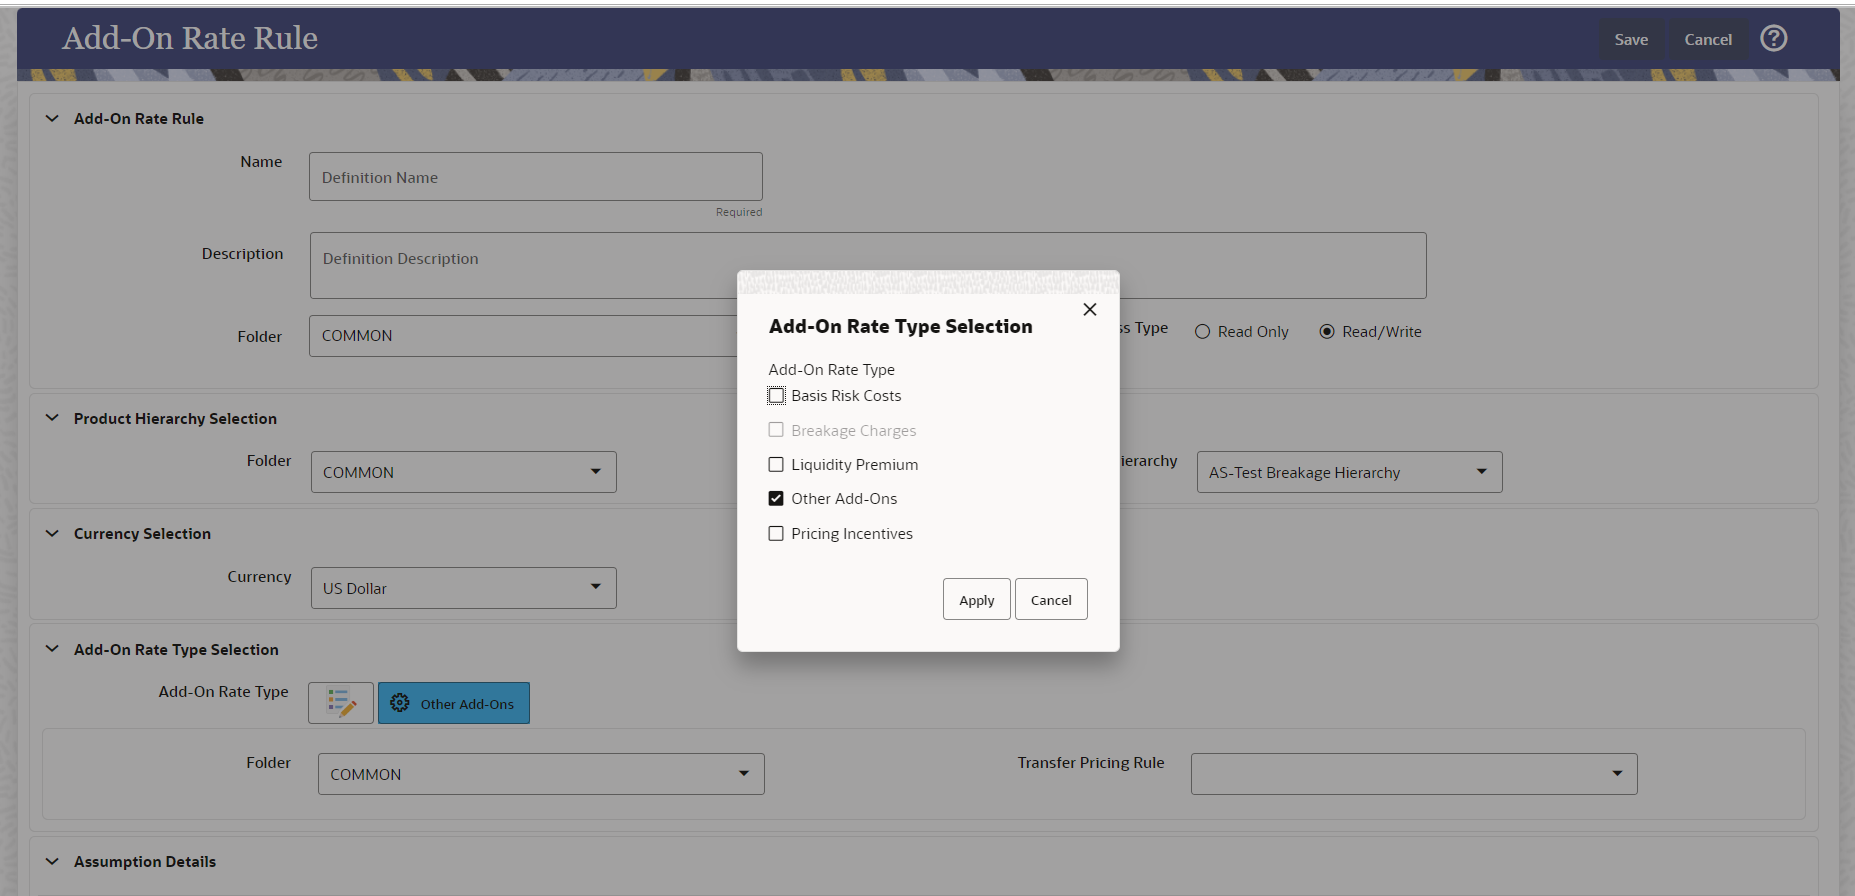 This screen allows you to select the Add-On Rate Type from the Add-On Rate Type Selection window.